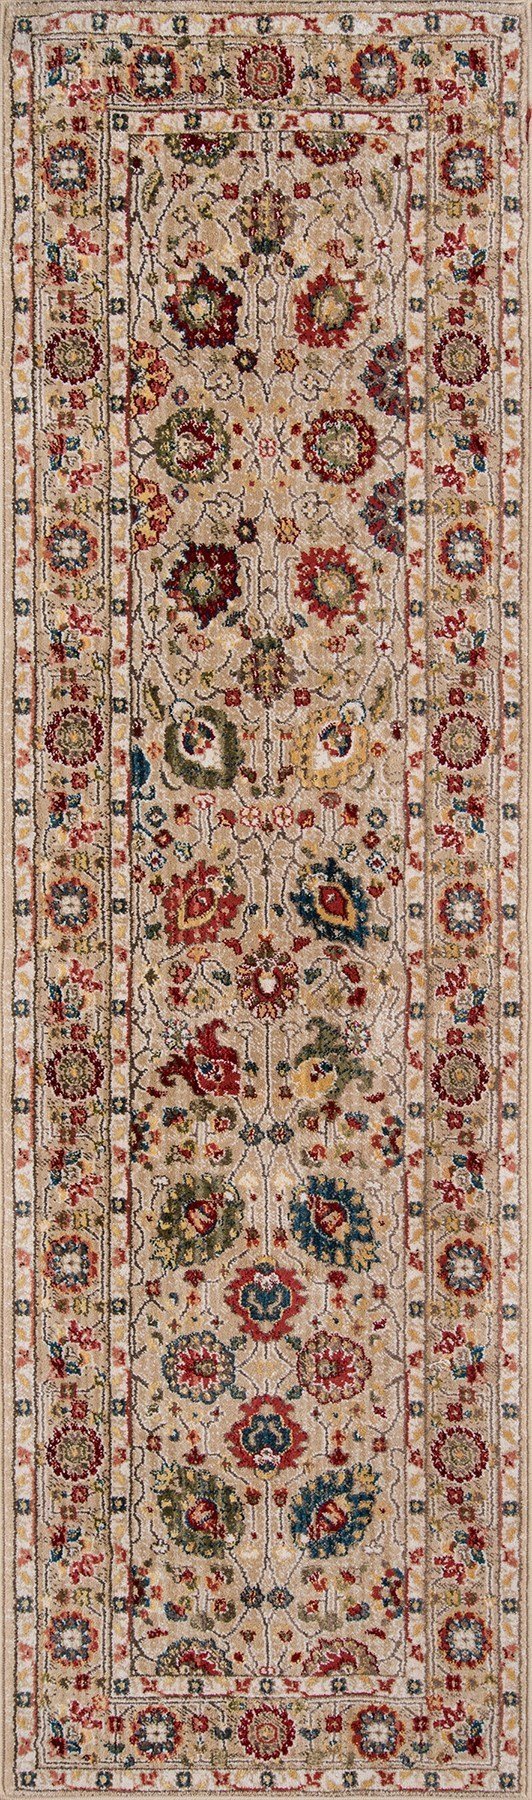 Lenox Area Rugs LE-04 Ivory 100% Poly Product of Turkey